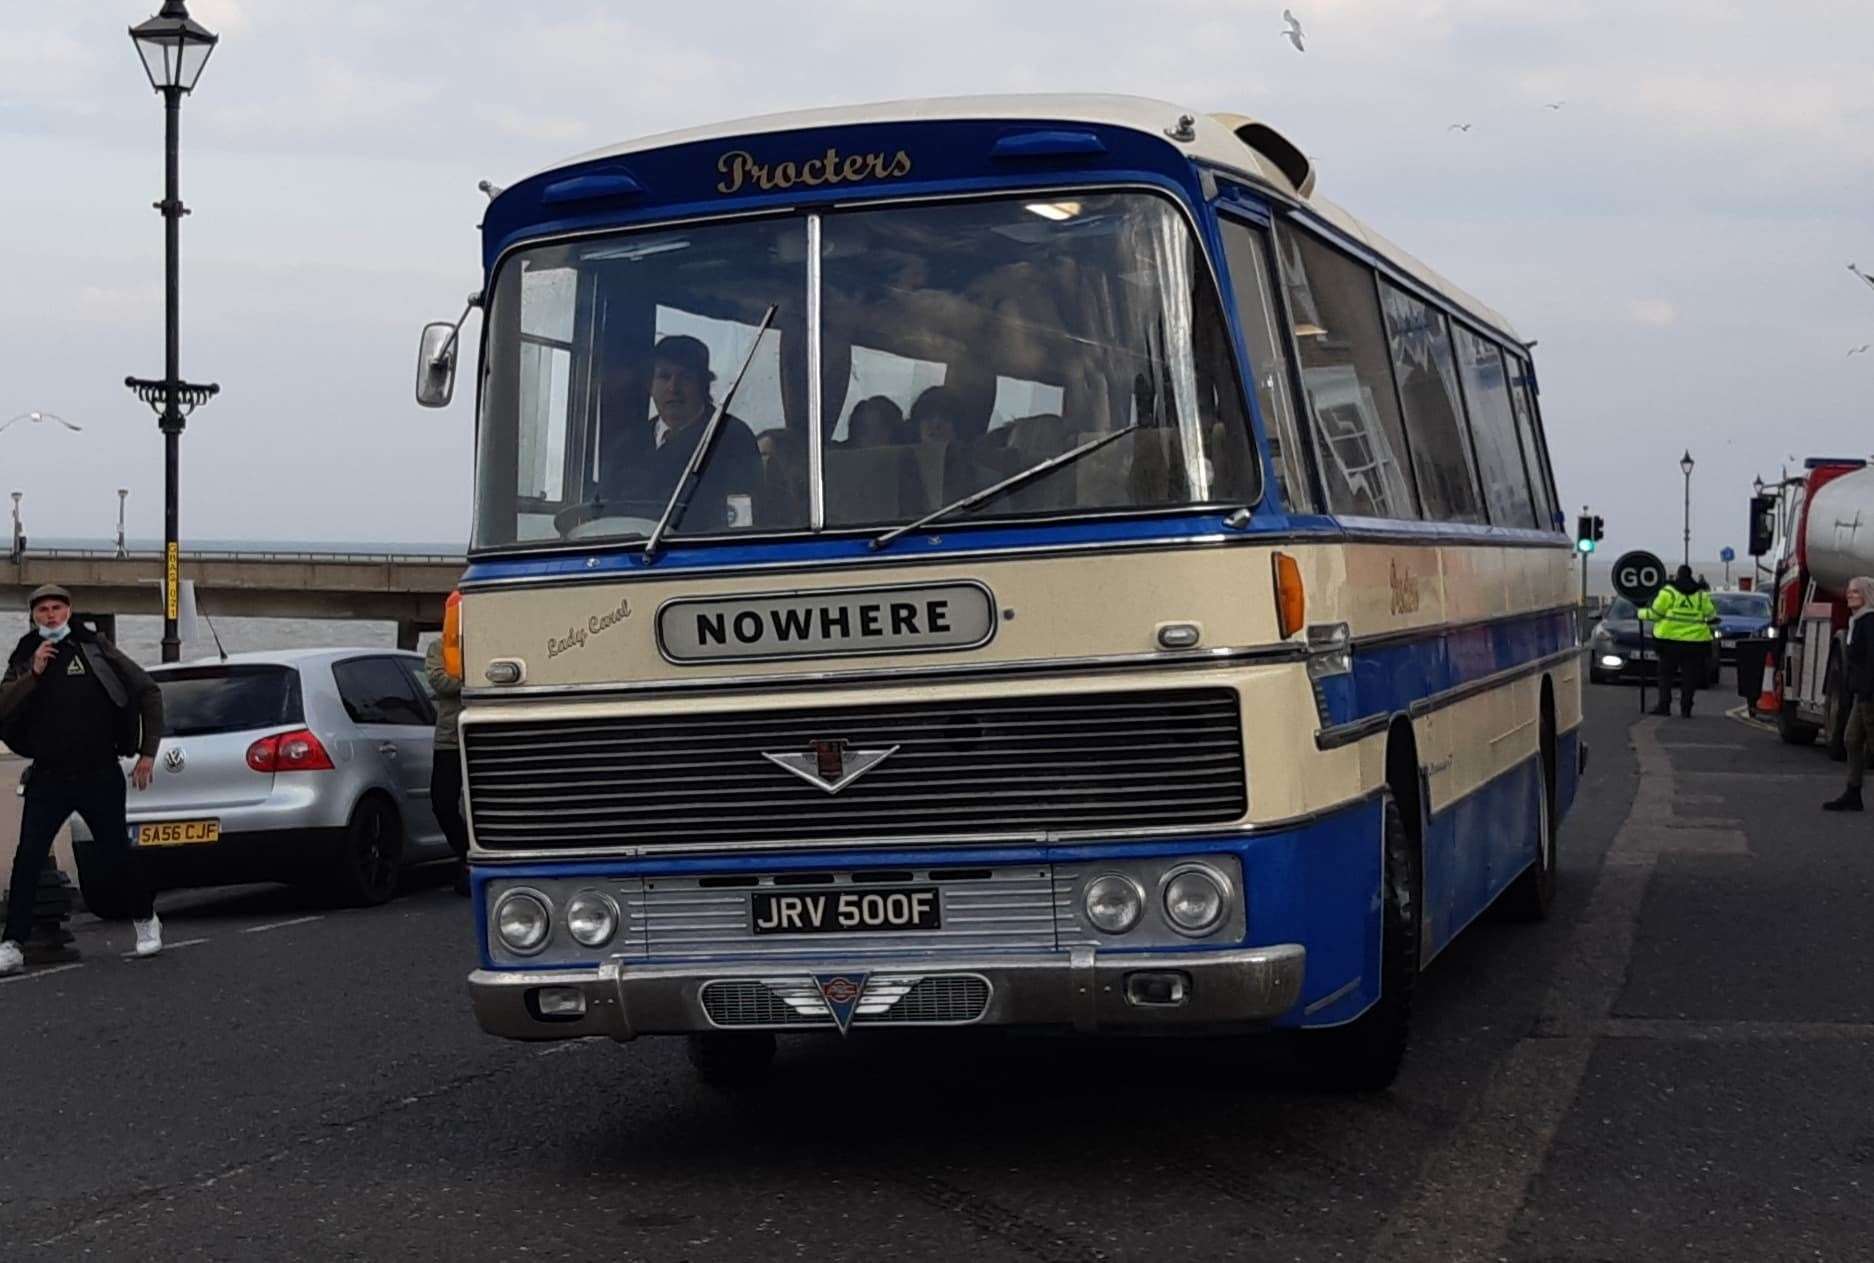 The Sex Pistols' 'Nowhere' tour bus in Deal